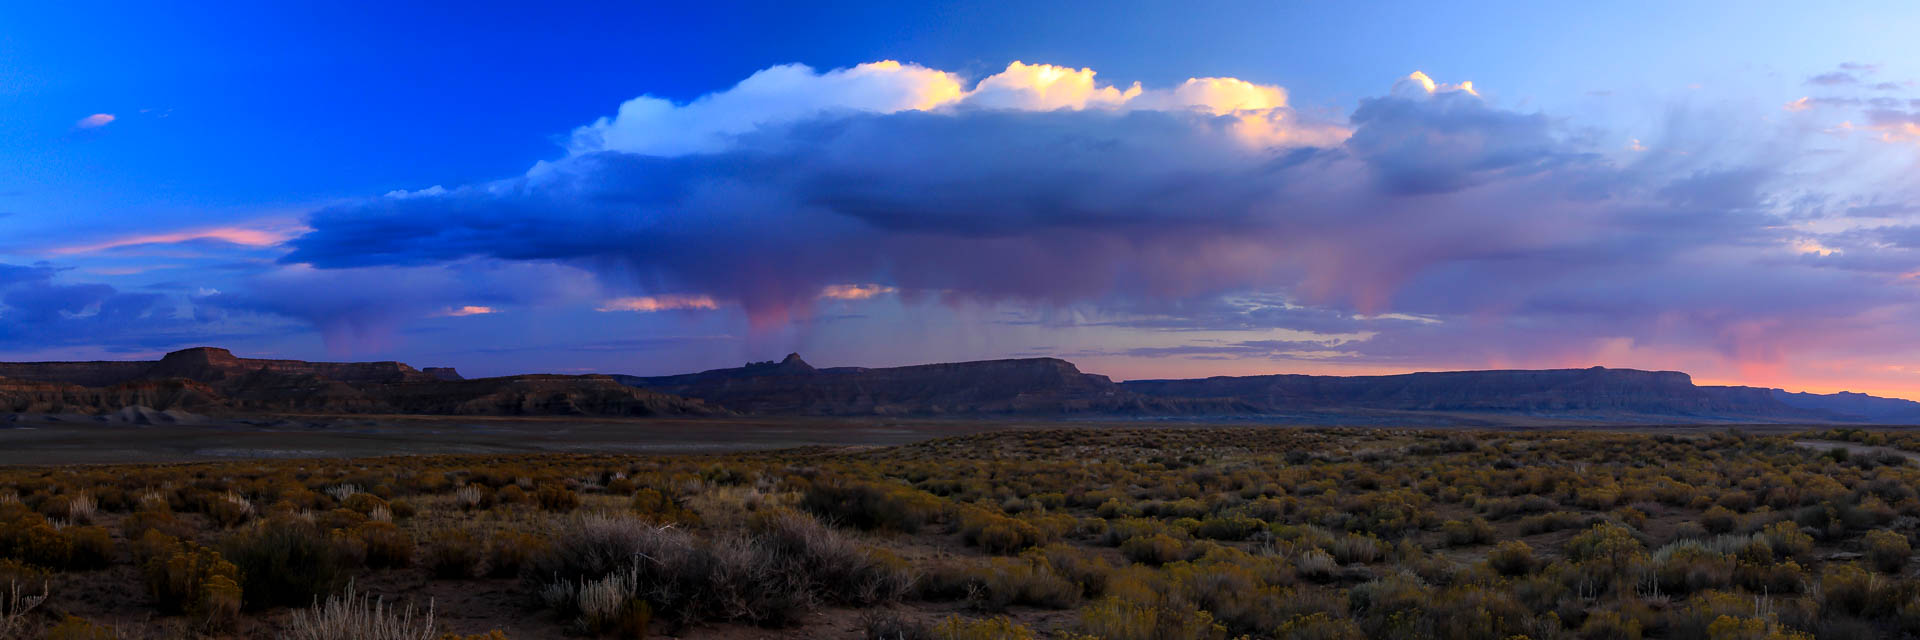 Morning thunderstorm on the Kaiparowits Plateau